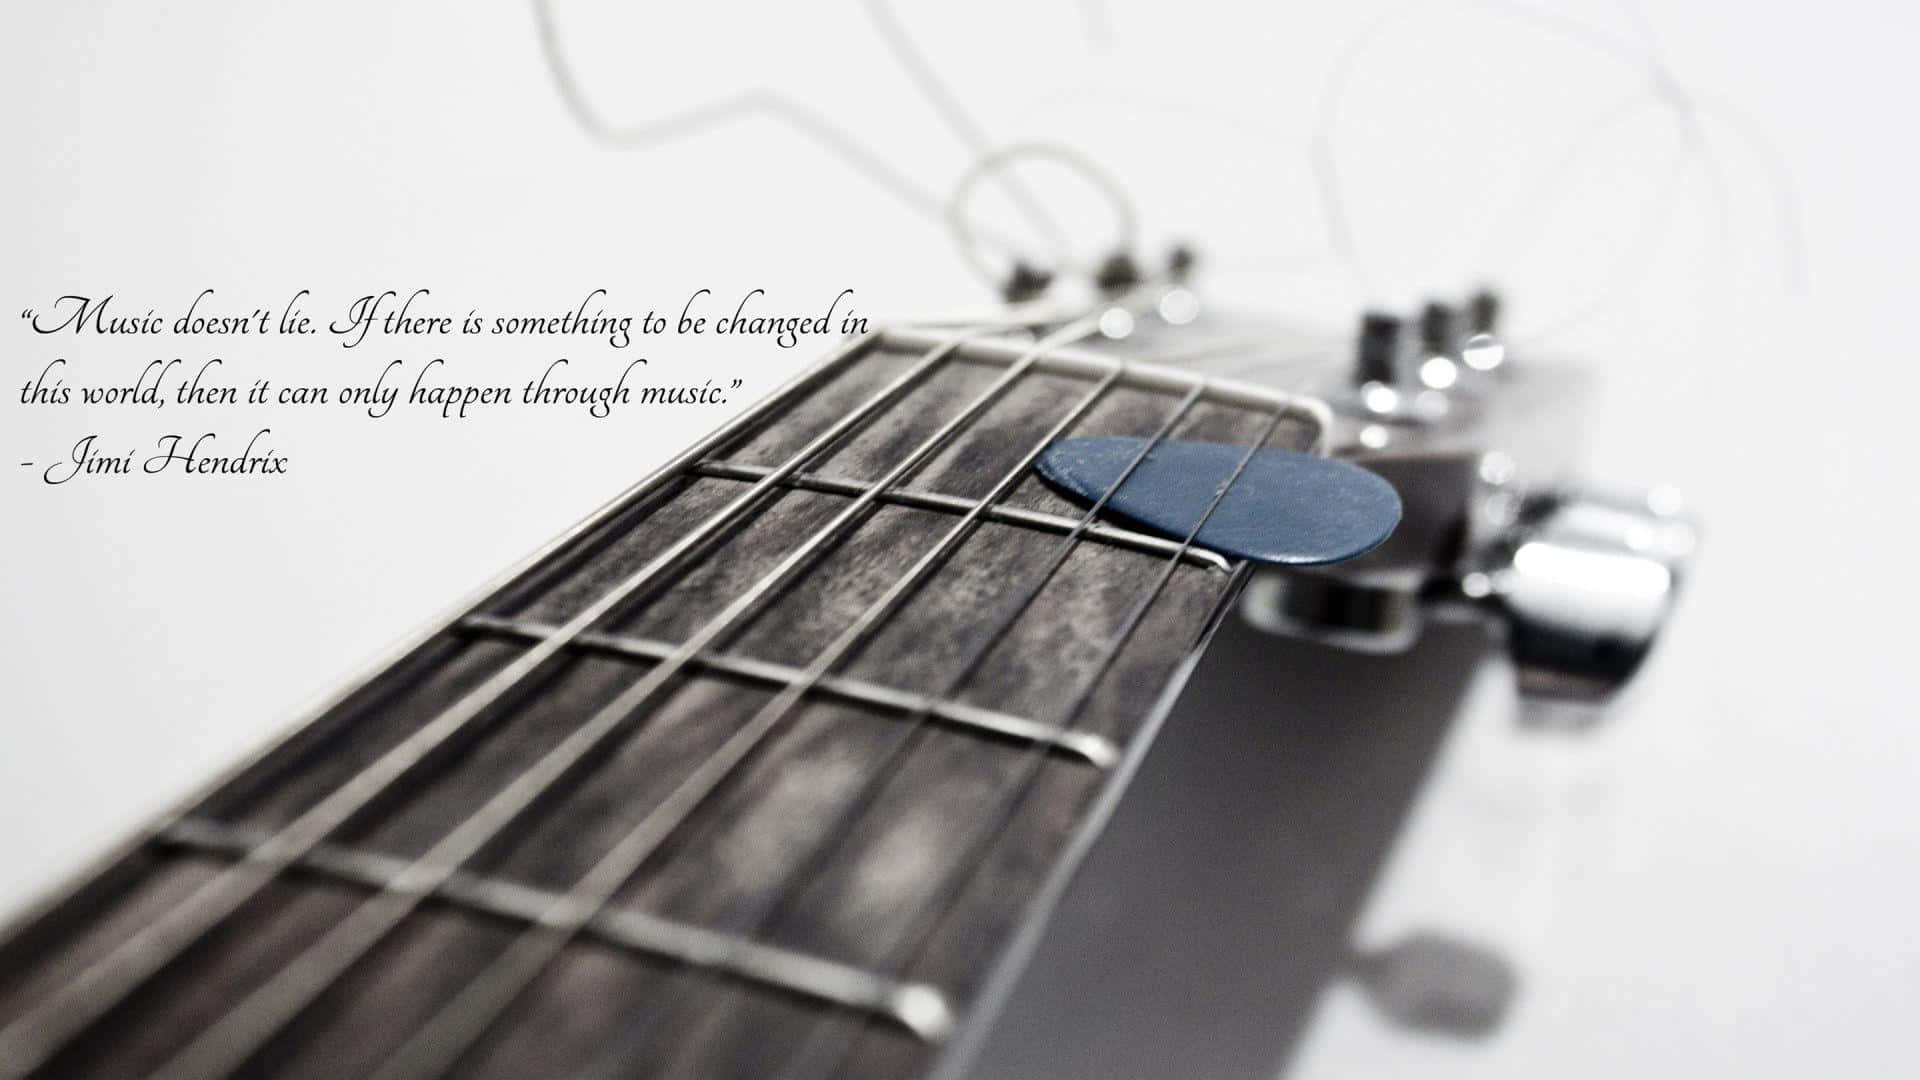 "Music is a world within itself, with a language we all understand" Wallpaper